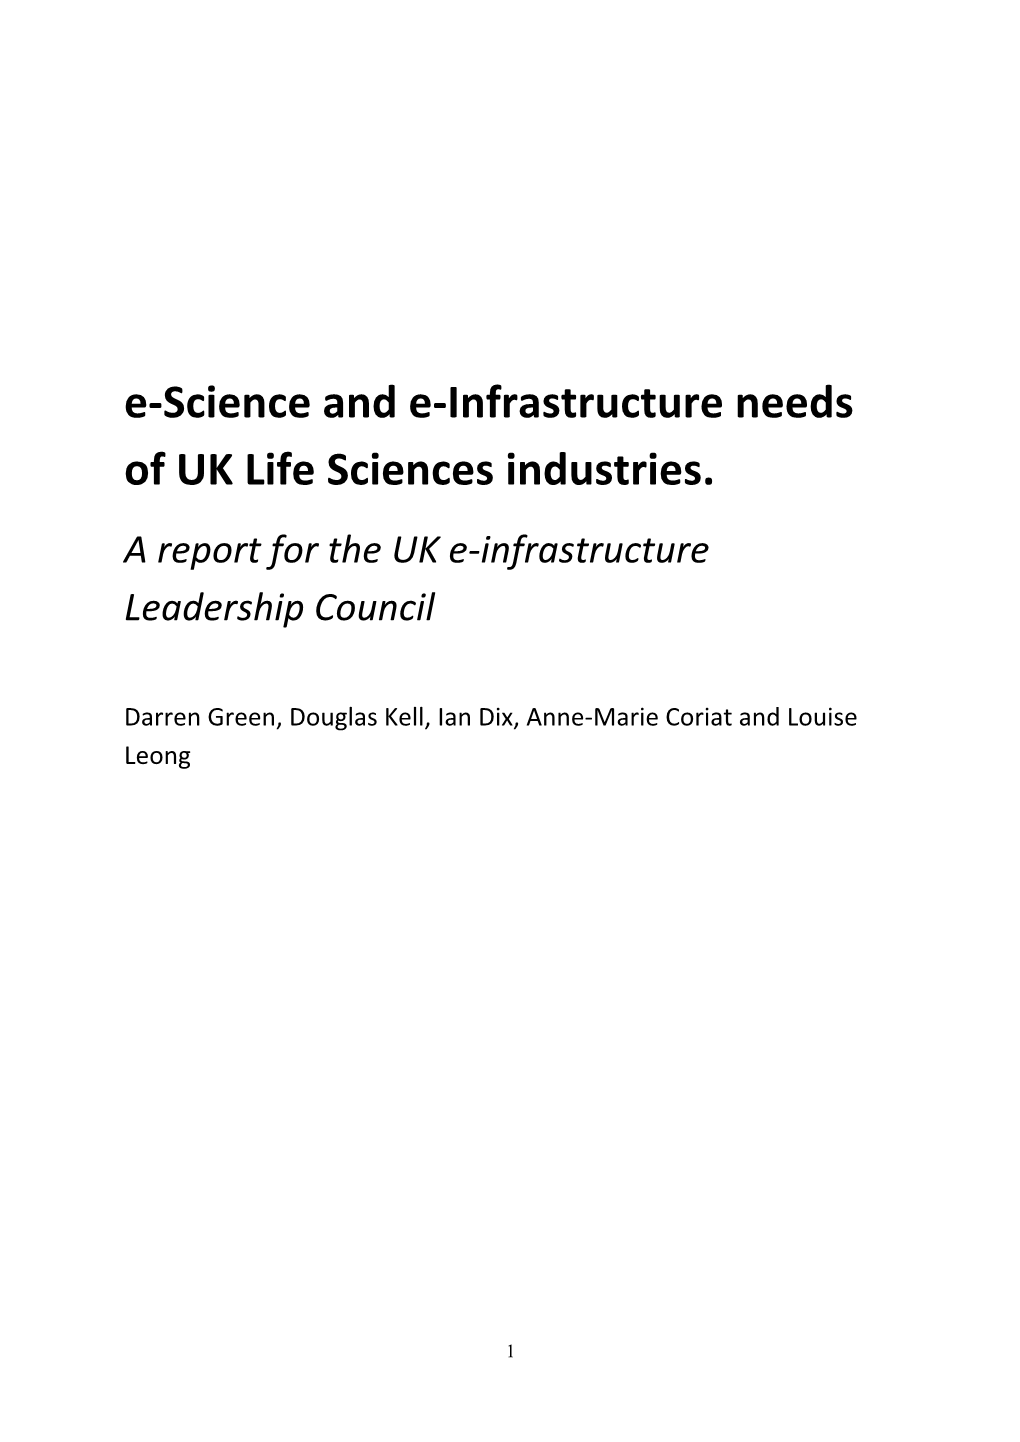 E-Science and E-Infrastructure Needs of UK Life Sciences Industries